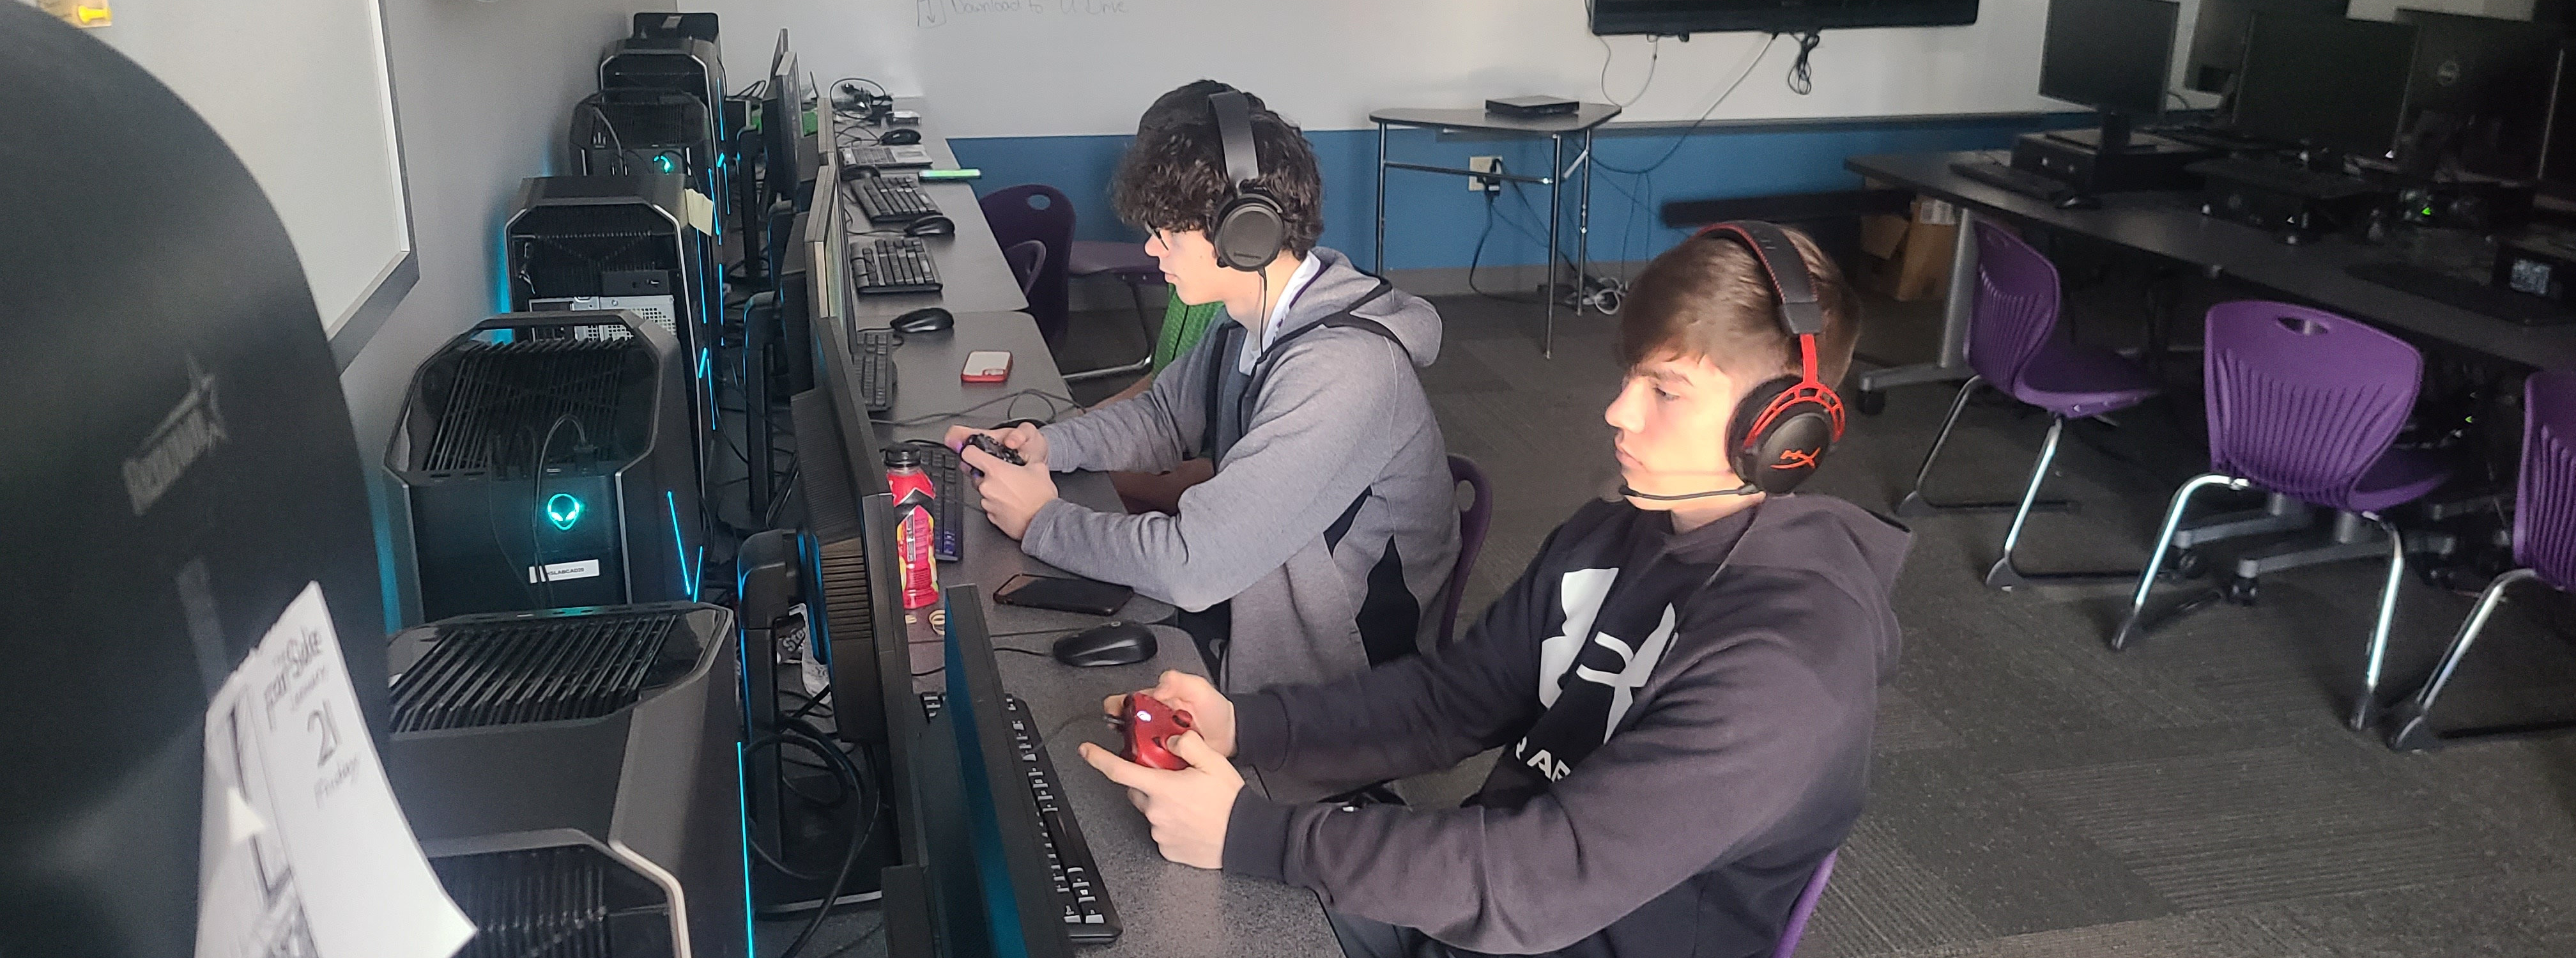 Players playing Fortnite